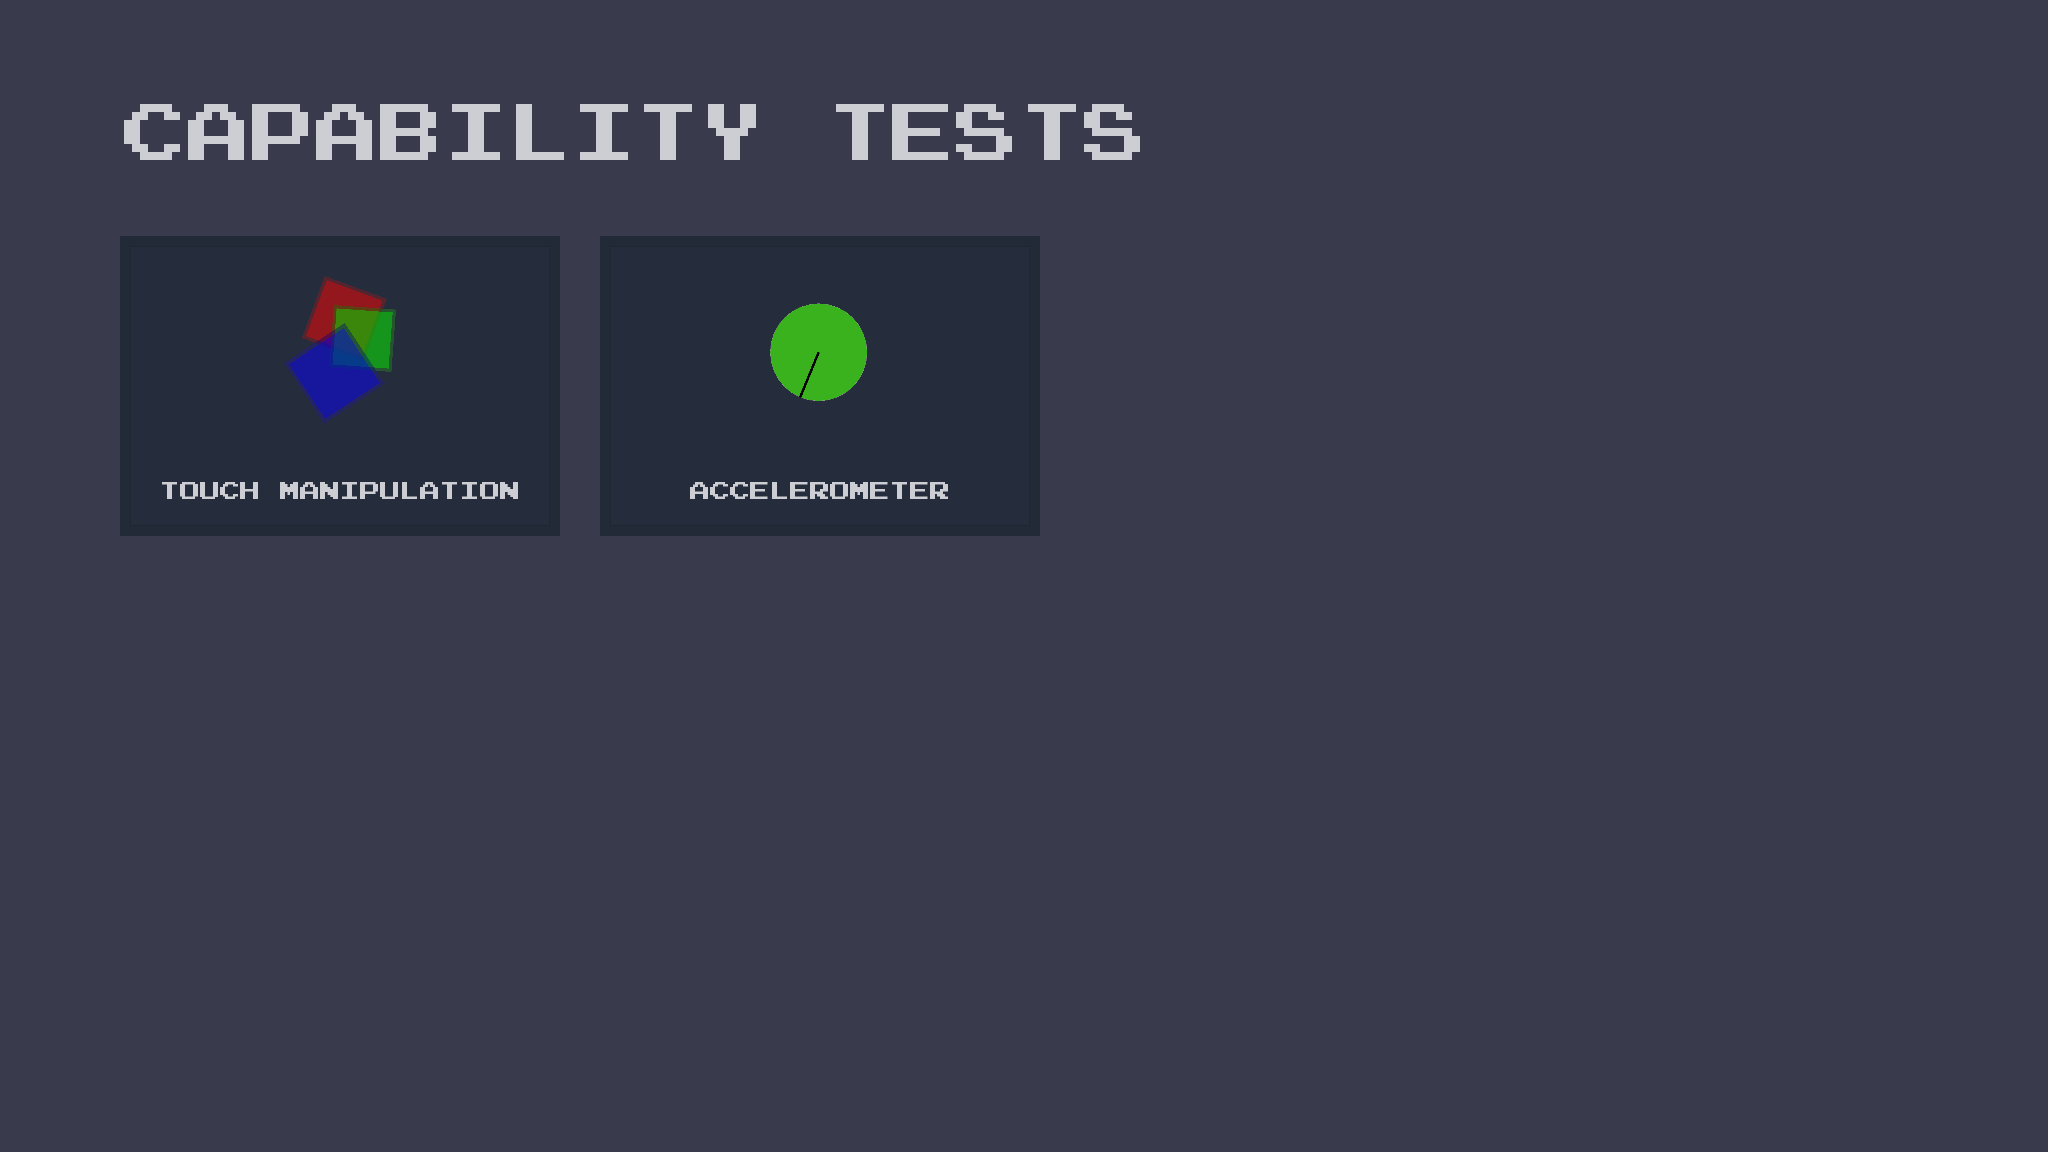 The result with both capability tests I've converted to date